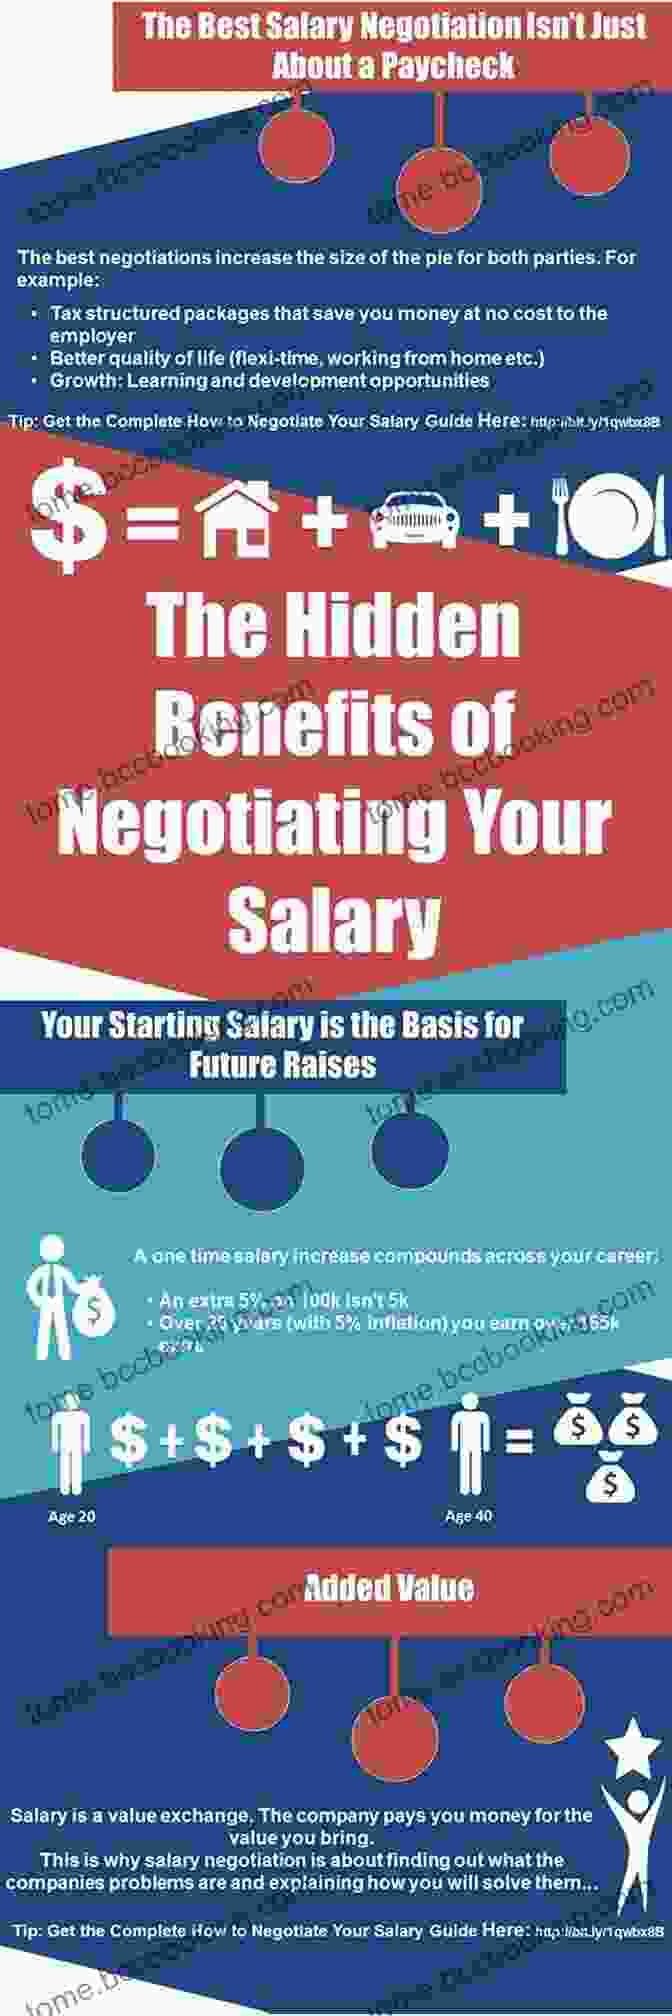 Salary And Benefits Negotiation Strategies Career Success Tidbits 2: CAREER PLANNING AND JOB SEARCH STRATEGIES Tips Every Young Adult Needs To Know To Plan Manage And Advance A Career Ella L (THE CAREER SUCCESS TIDBITS SERIES)